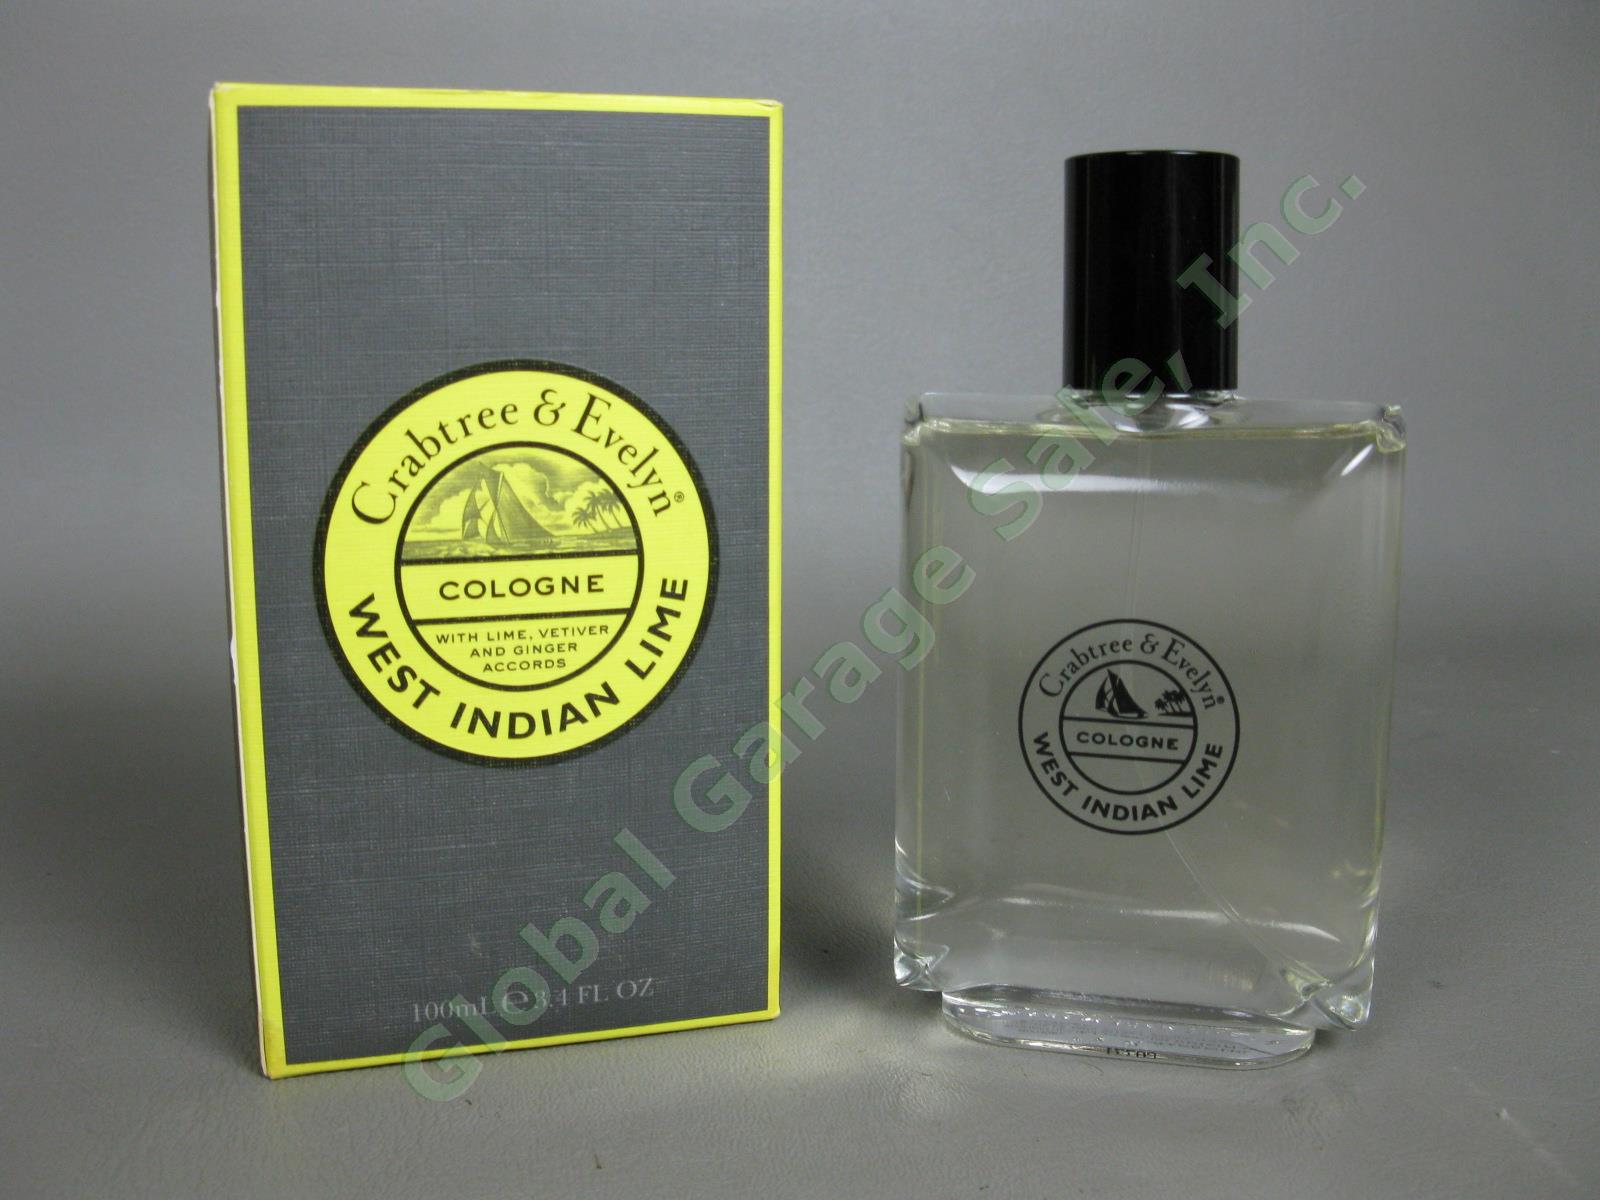 NEW Crabtree & Evelyn West Indian Lime Cologne 3.4oz/100mL Fragrance Spray NR